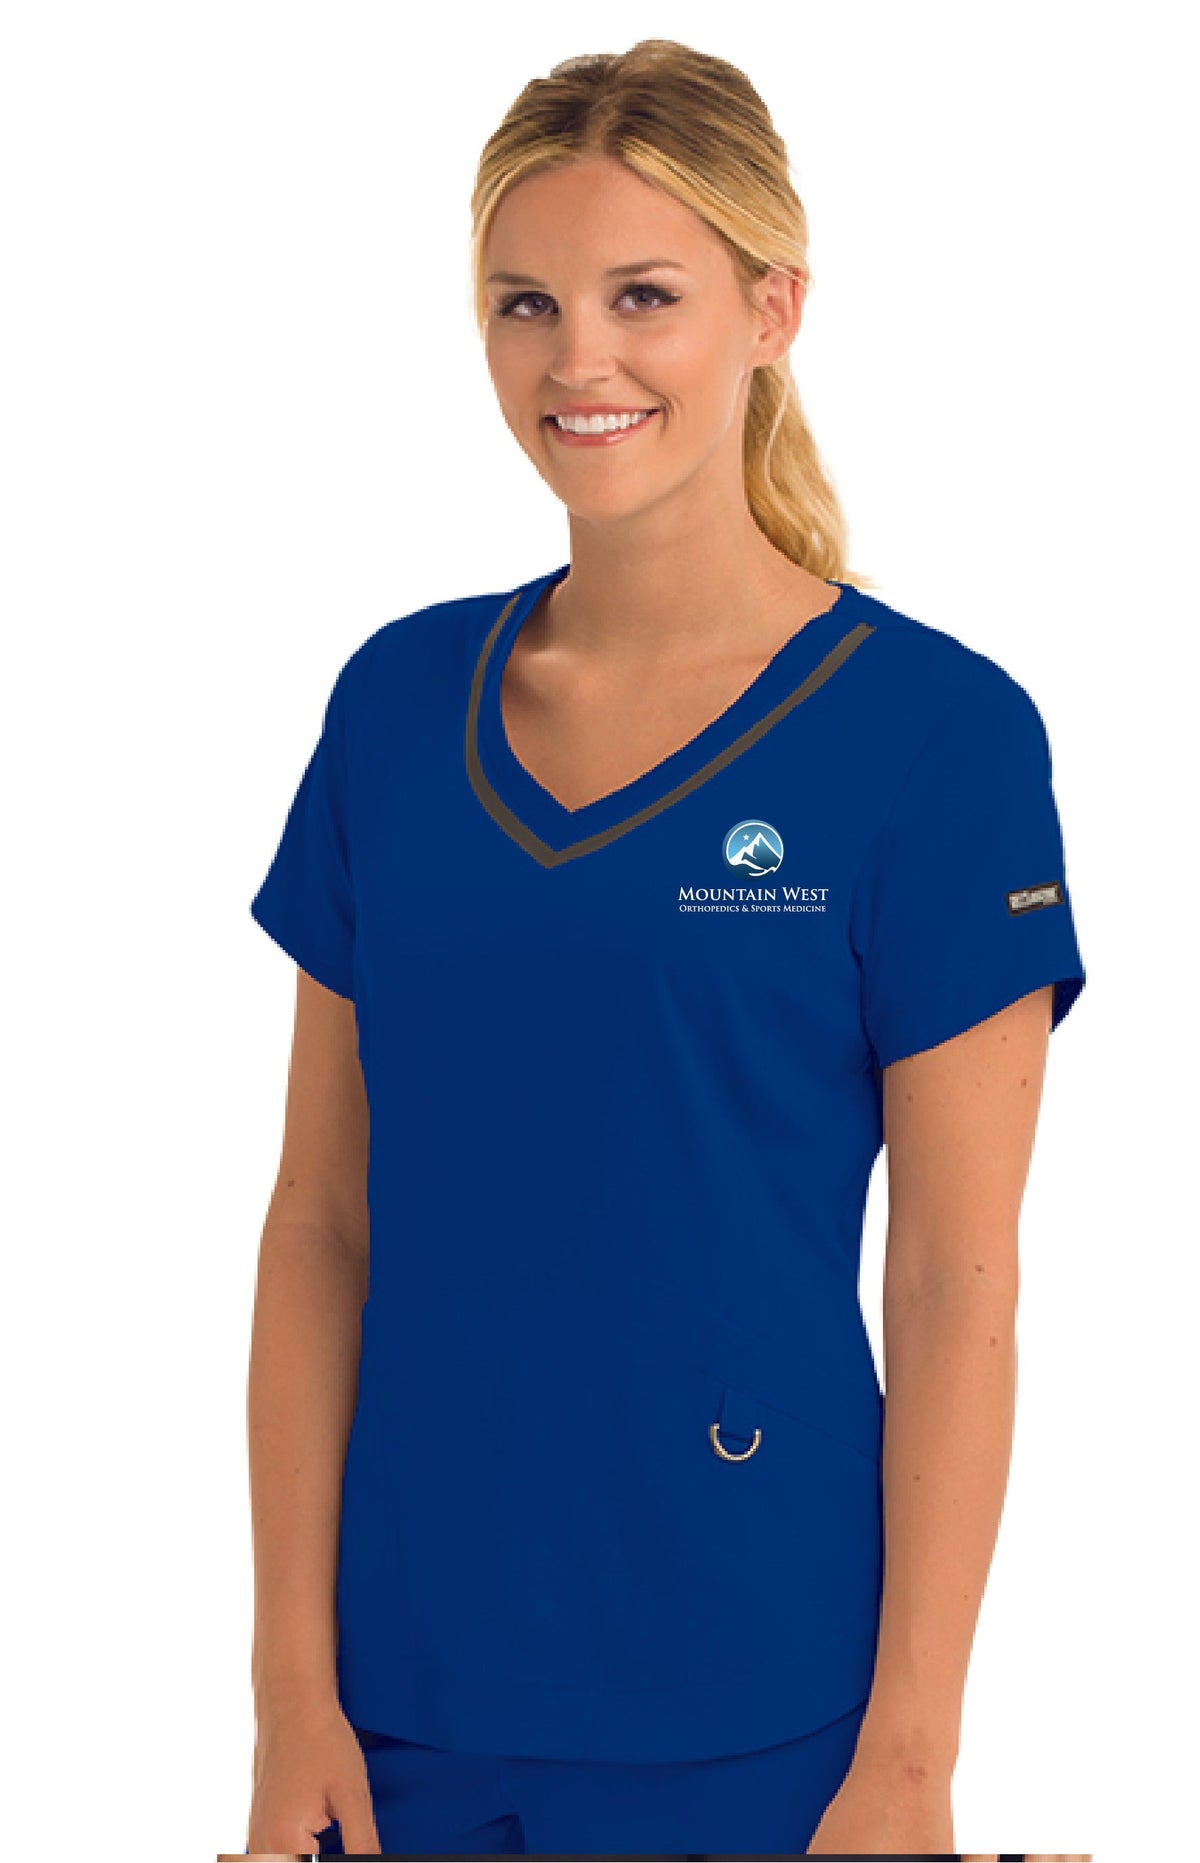 SVH - Ortho and Sports - 7187 Ladies 3 Pocket Barco Tape Top